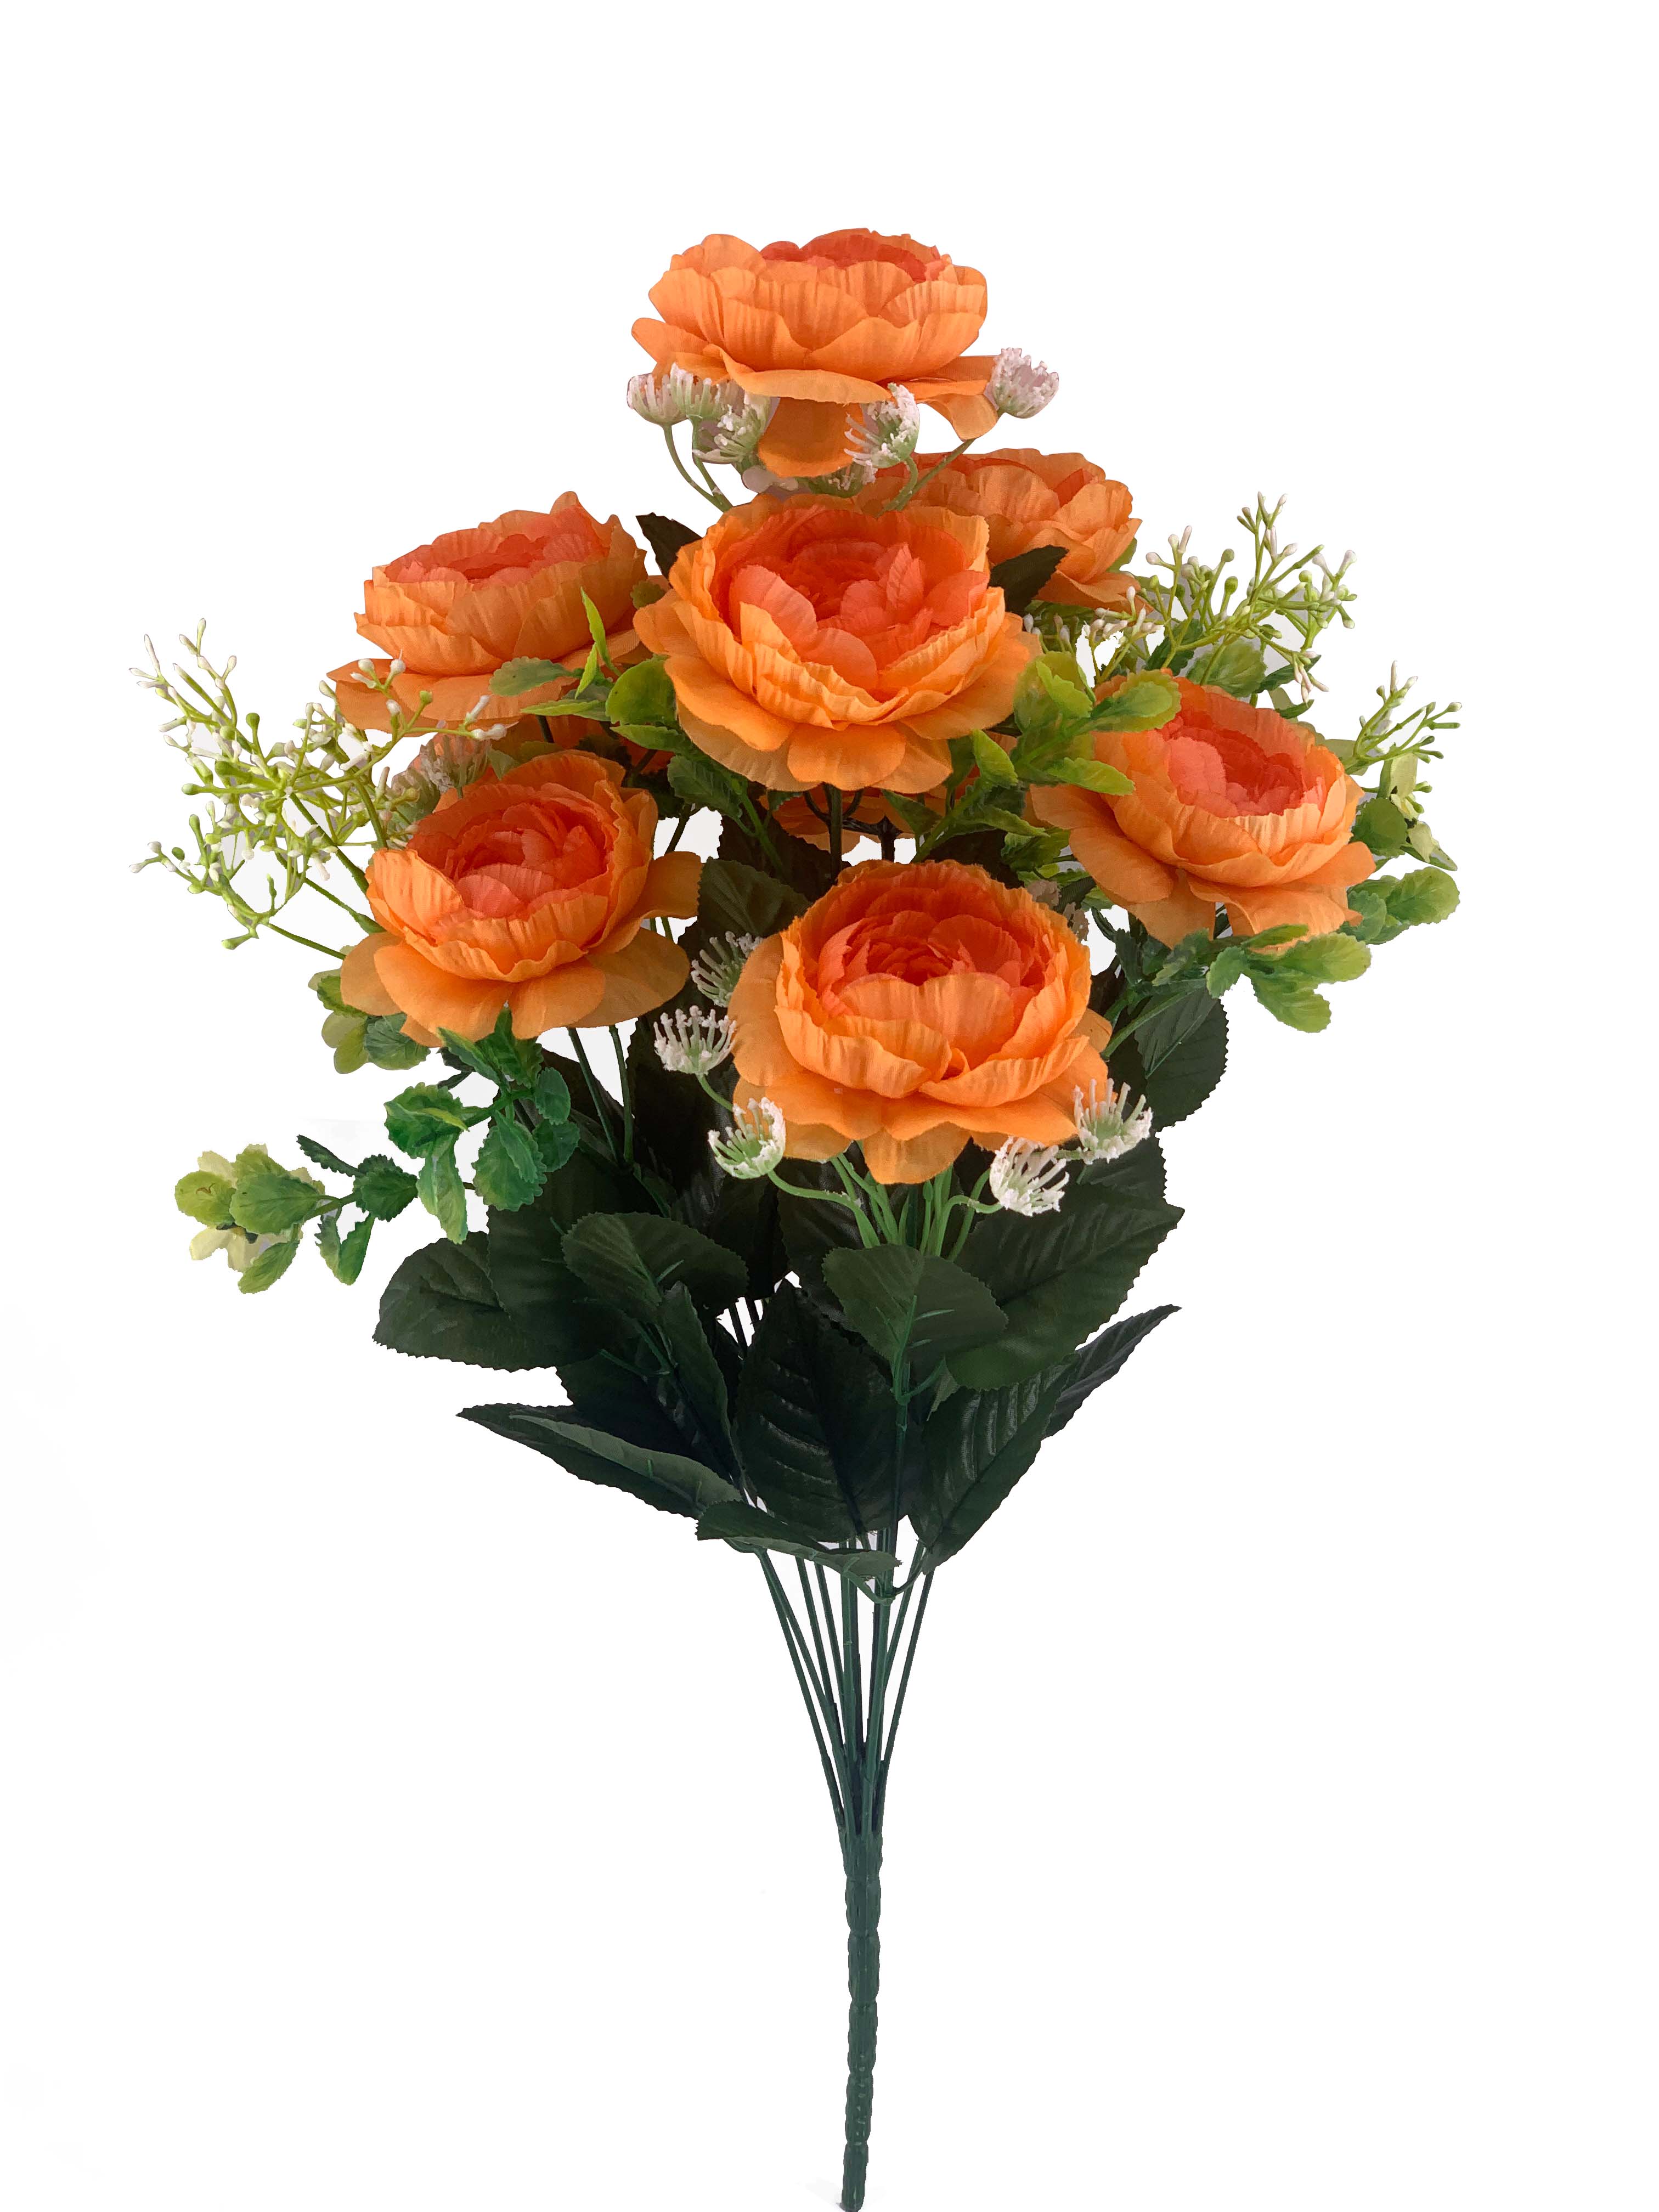 Mainstays 20.5" Artificial Flower Bouquet, Camellia, Orange Color. Indoor Use,  Party Centerpiece Table Decorations - image 1 of 5